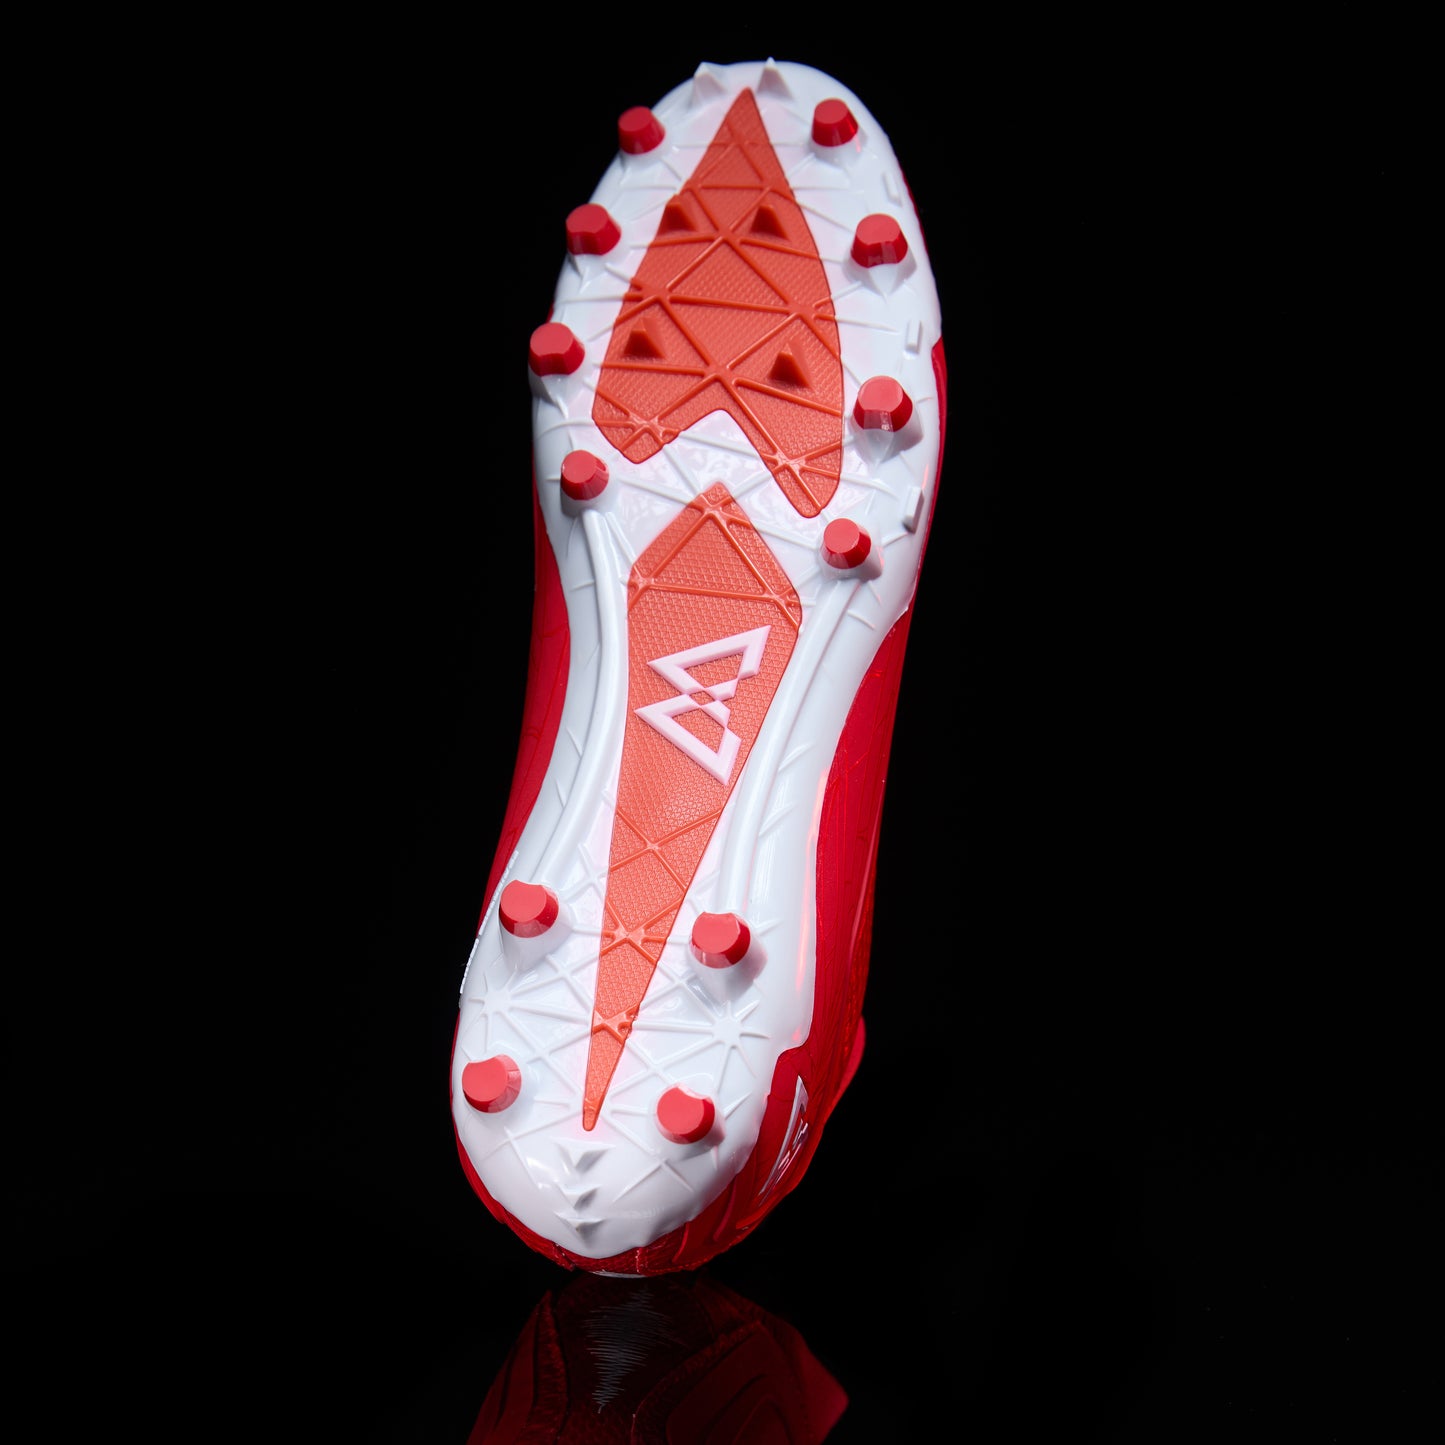 BeastMode B.T.A. Elite Football Cleat – Red